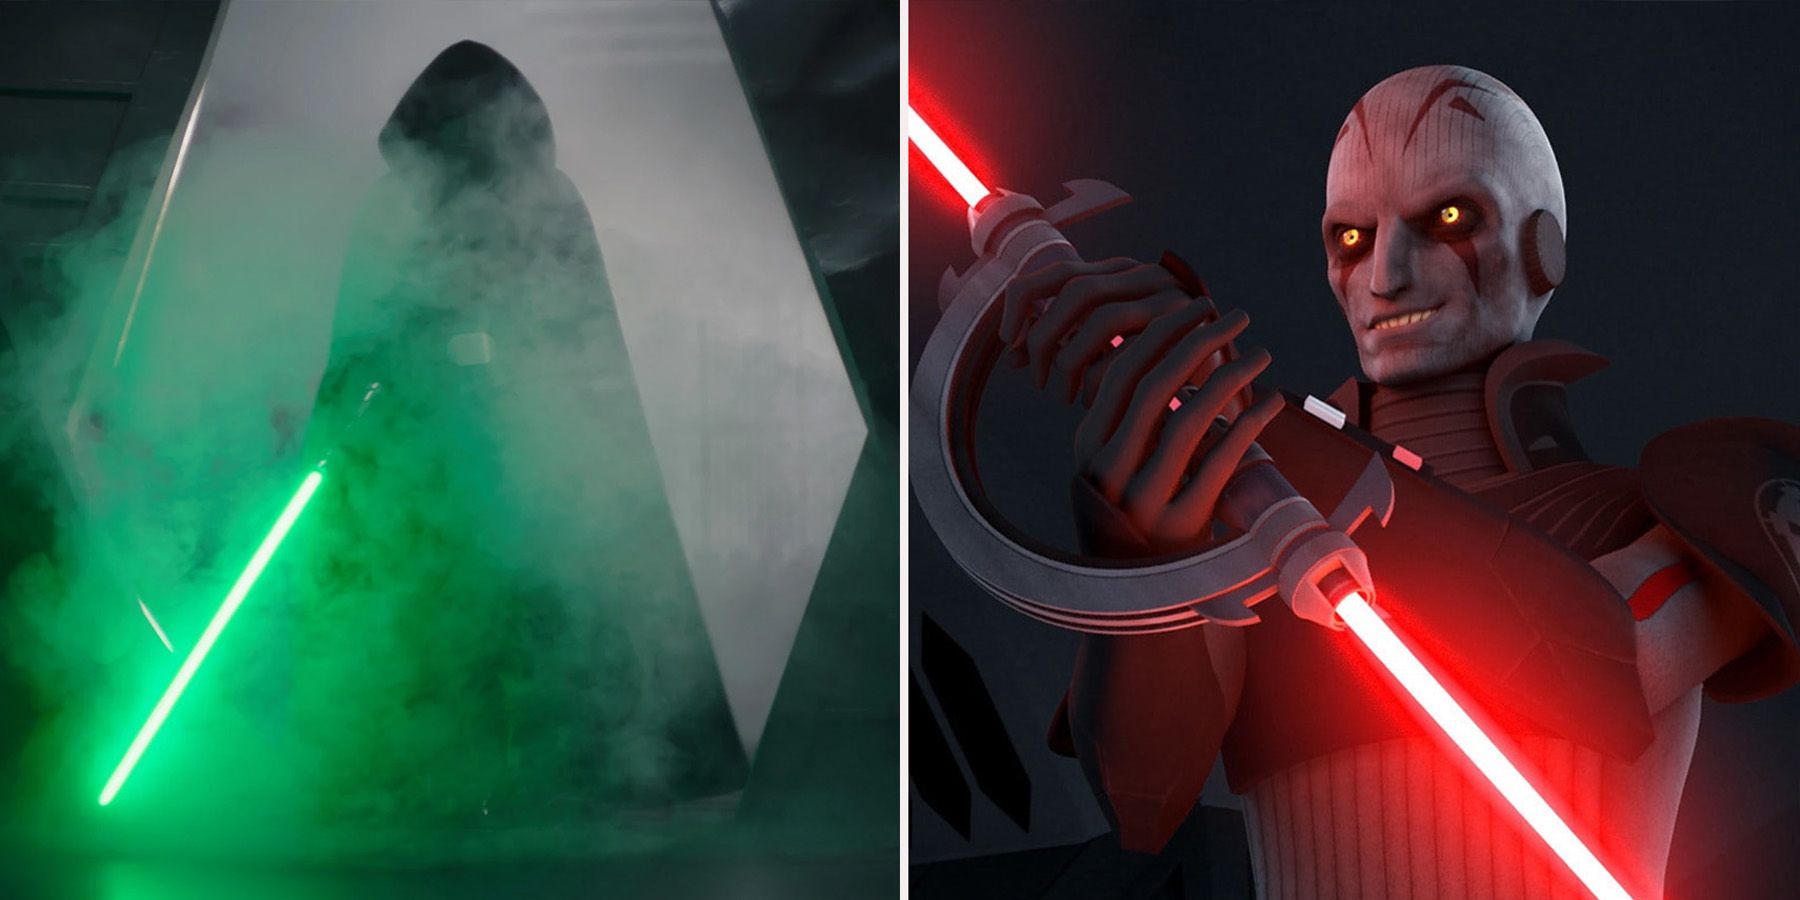 The Best Lightsabers in Star Wars